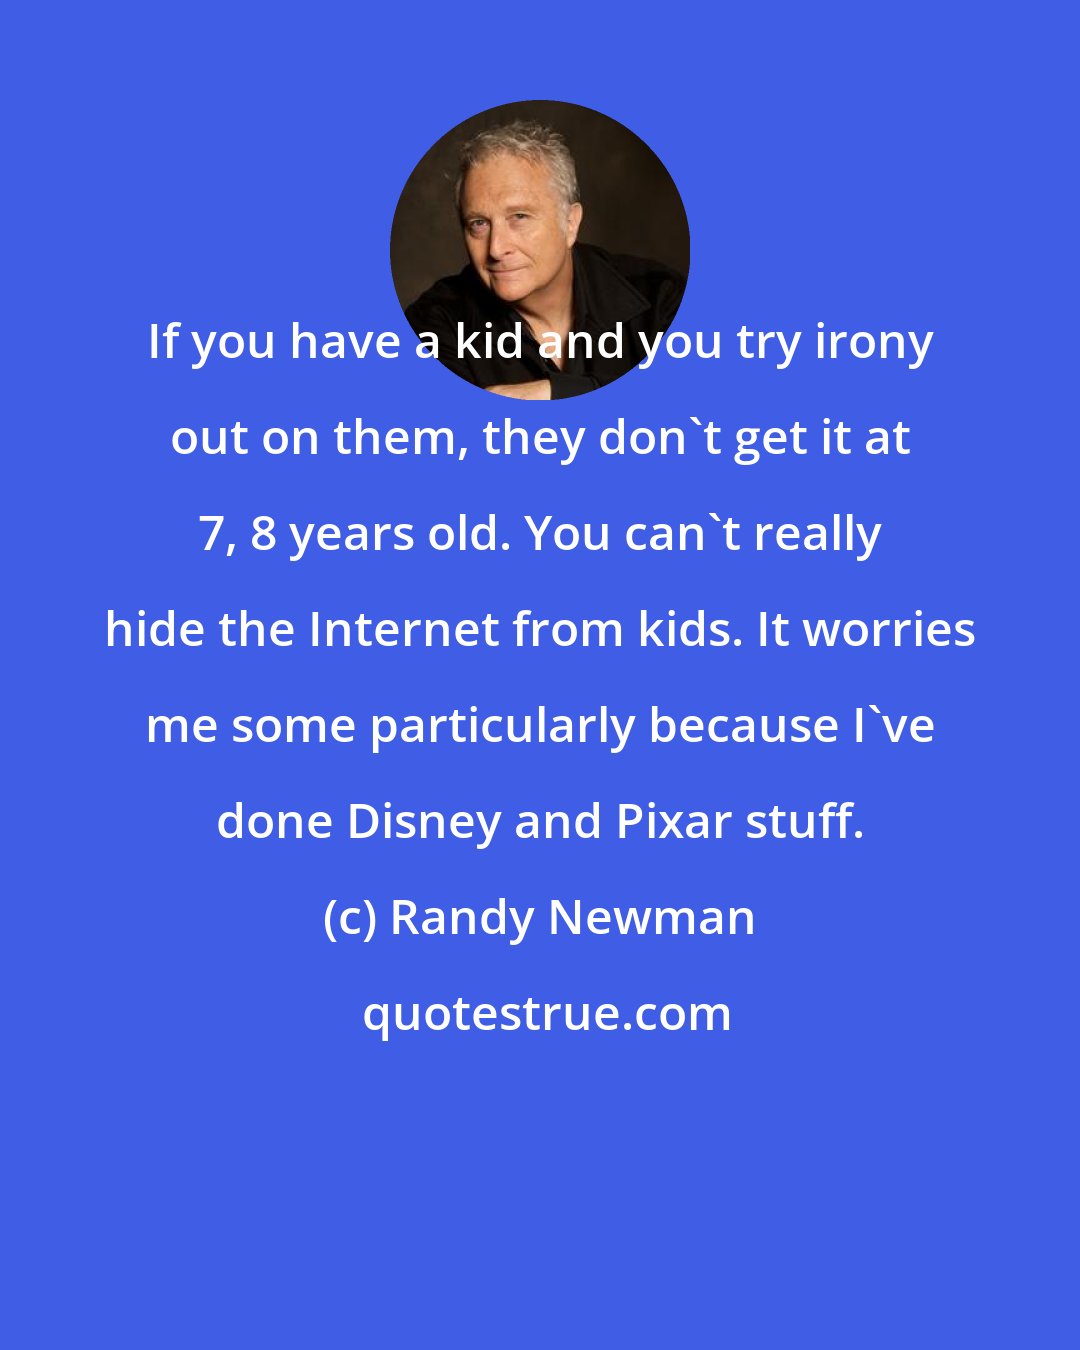 Randy Newman: If you have a kid and you try irony out on them, they don't get it at 7, 8 years old. You can't really hide the Internet from kids. It worries me some particularly because I've done Disney and Pixar stuff.